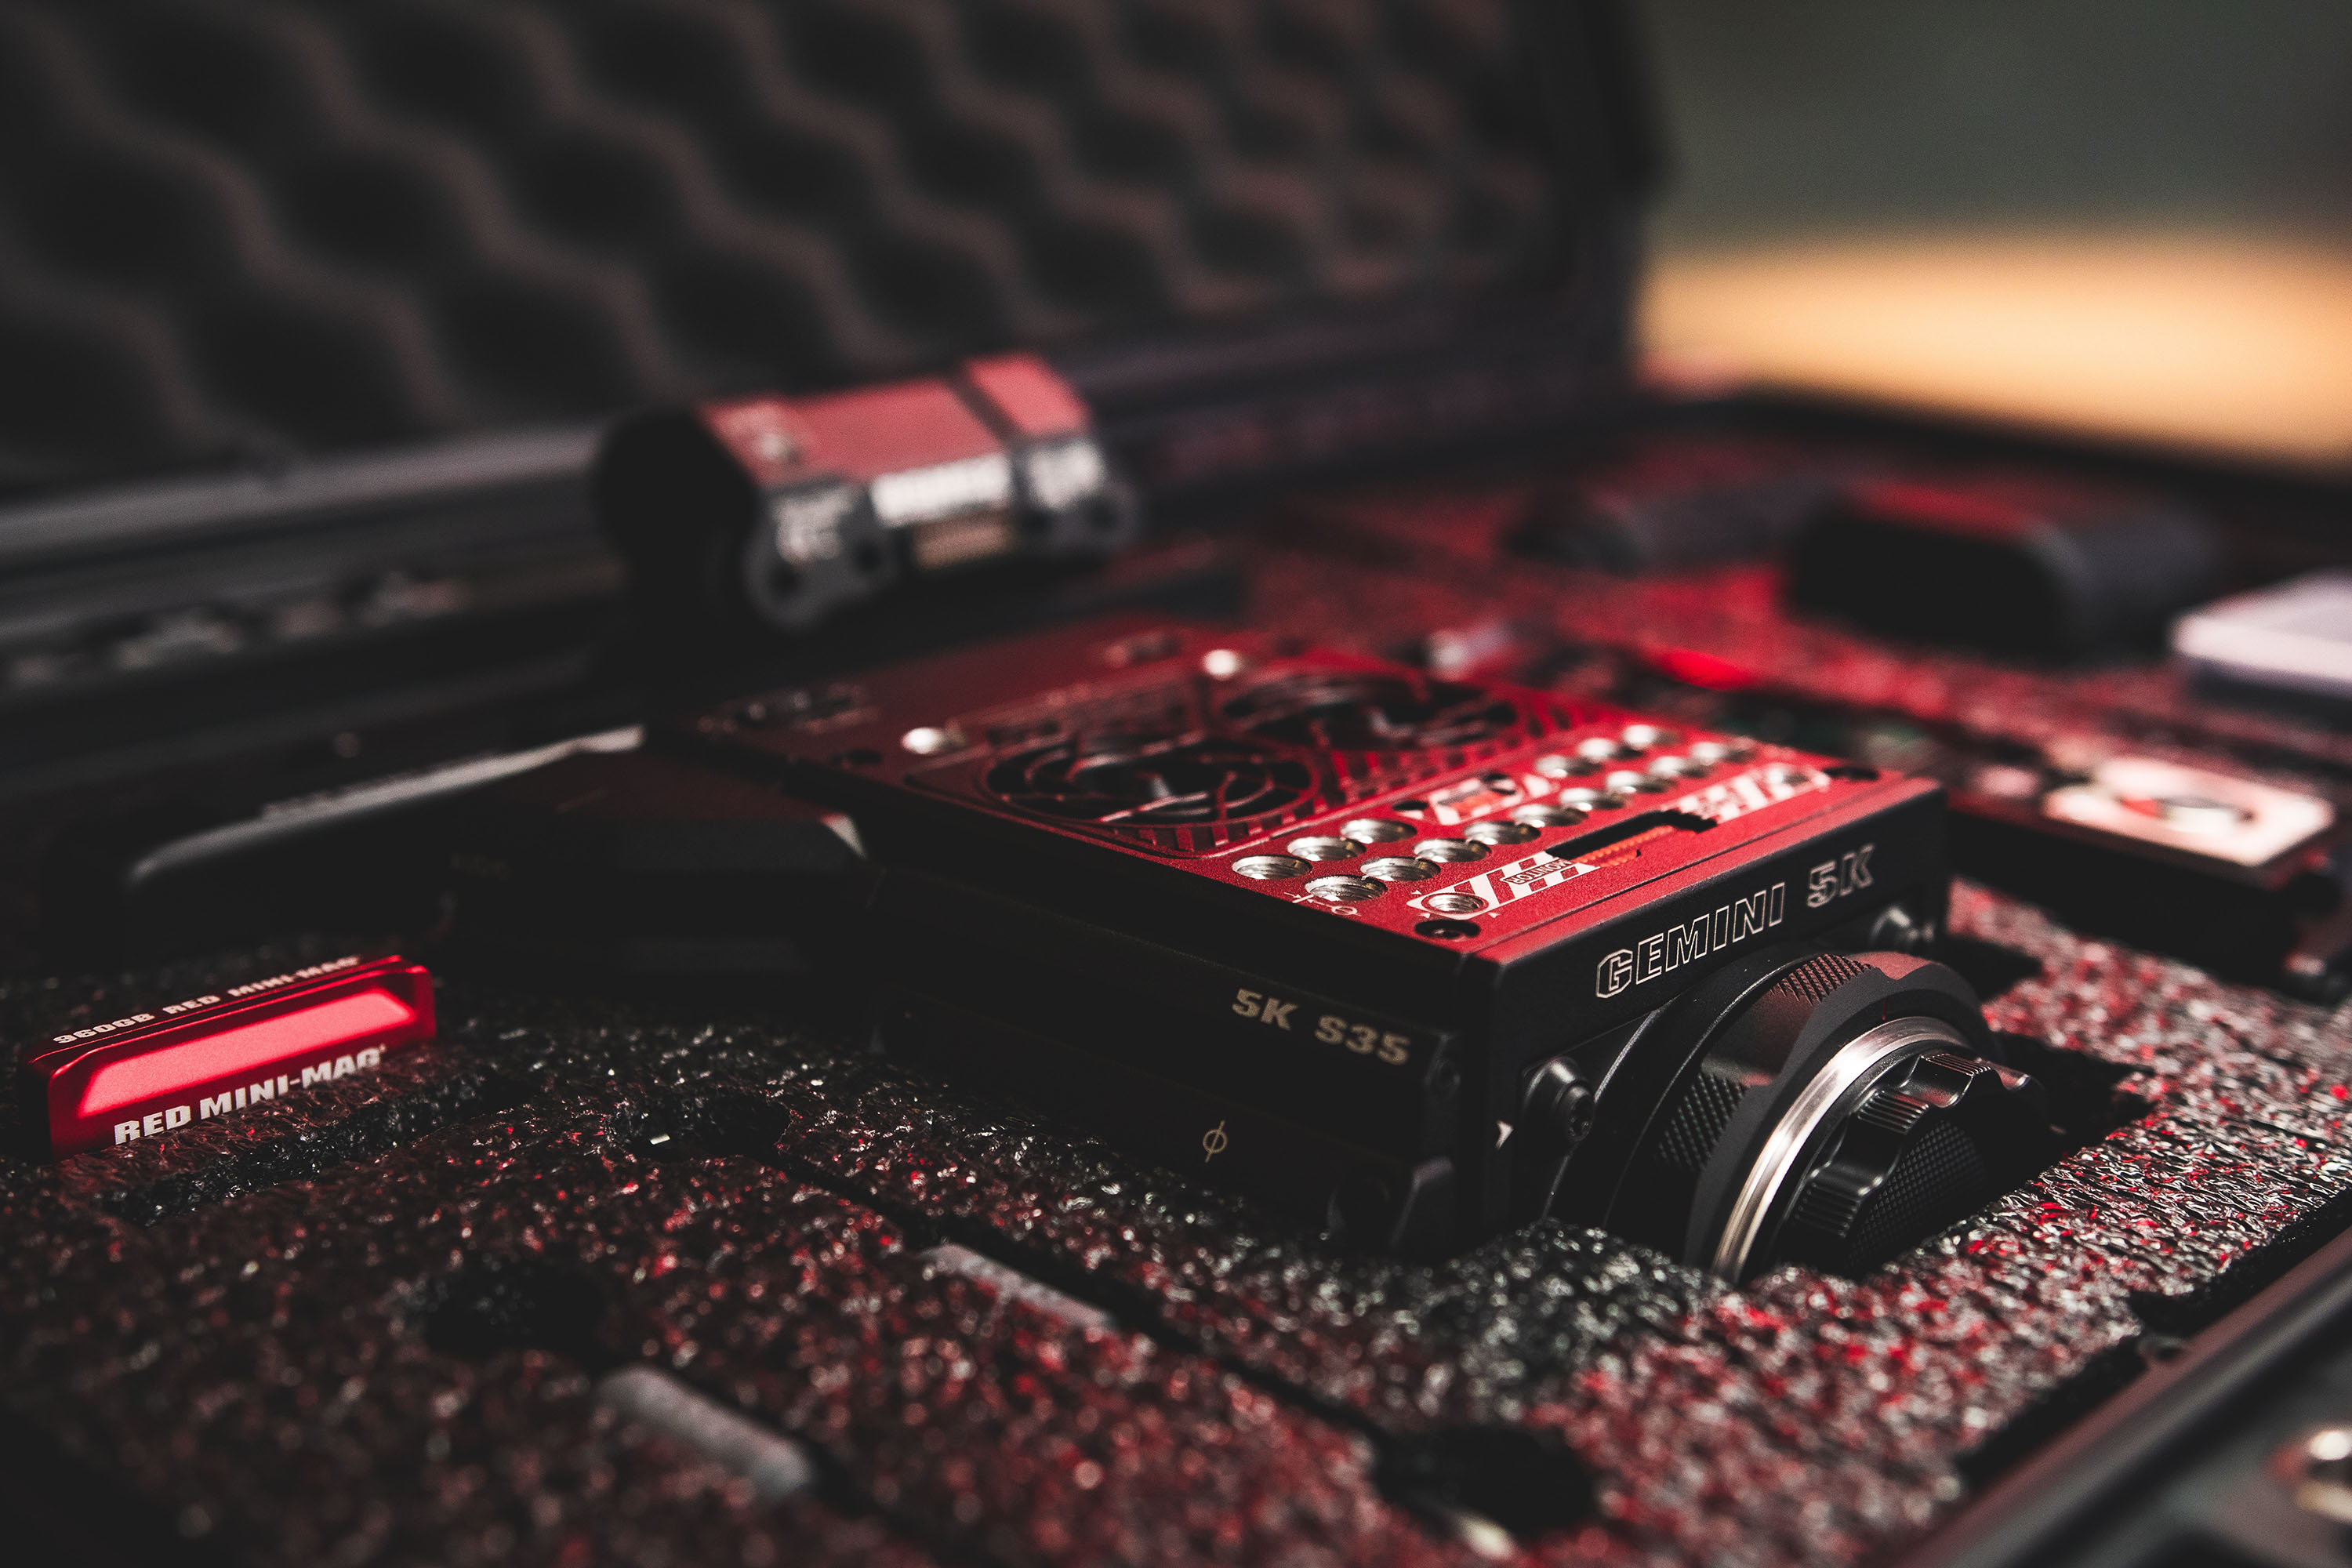 Rent a RED Mini-Mag SSD 480GB at